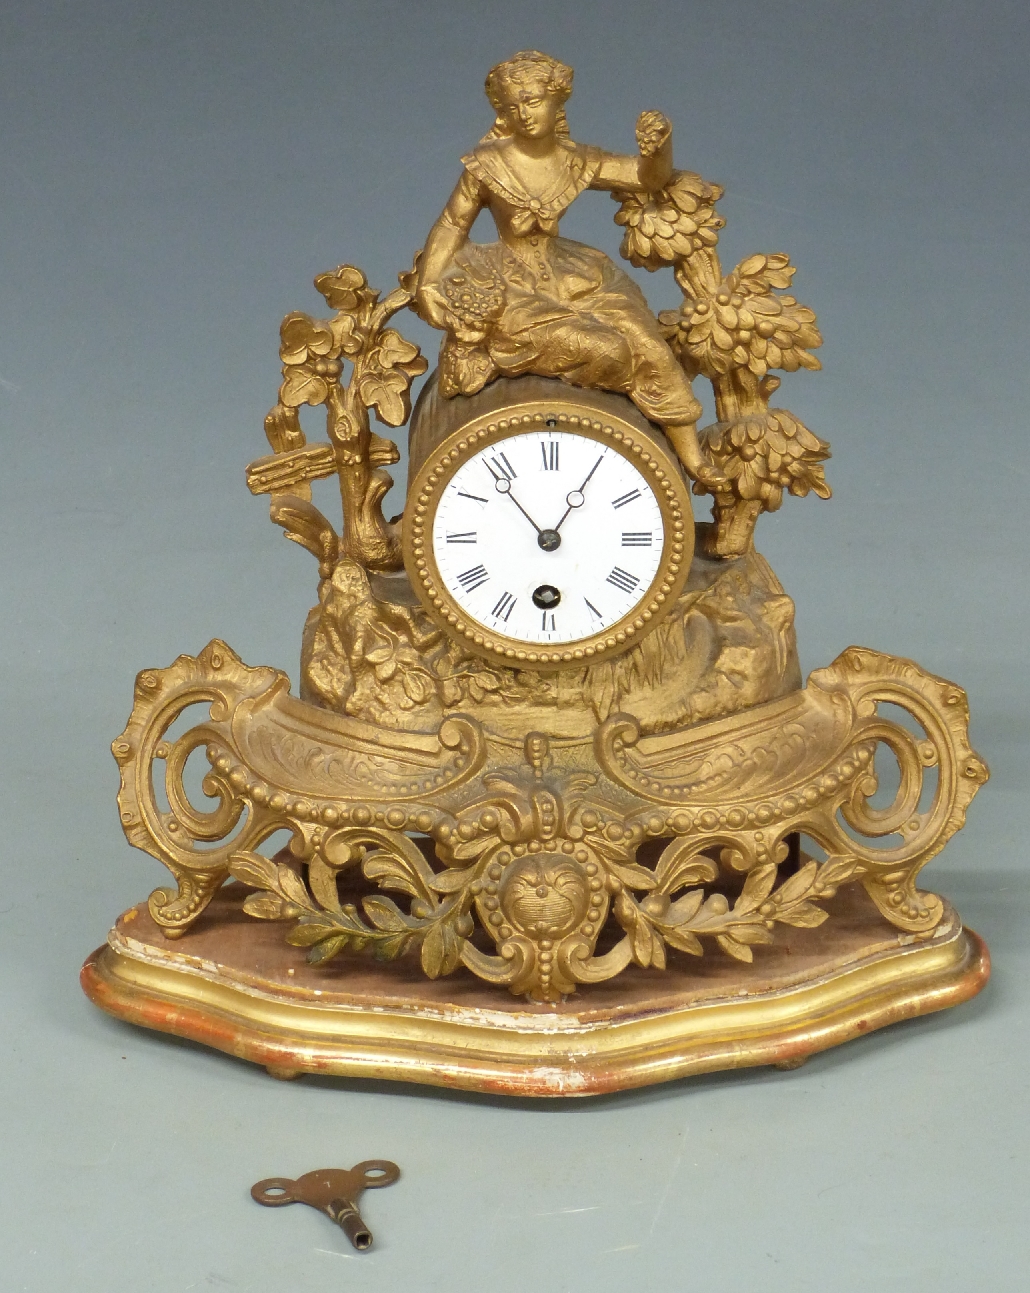 19thC French figural mantel clock, the Roman enamel dial with Breguet hands, the single train